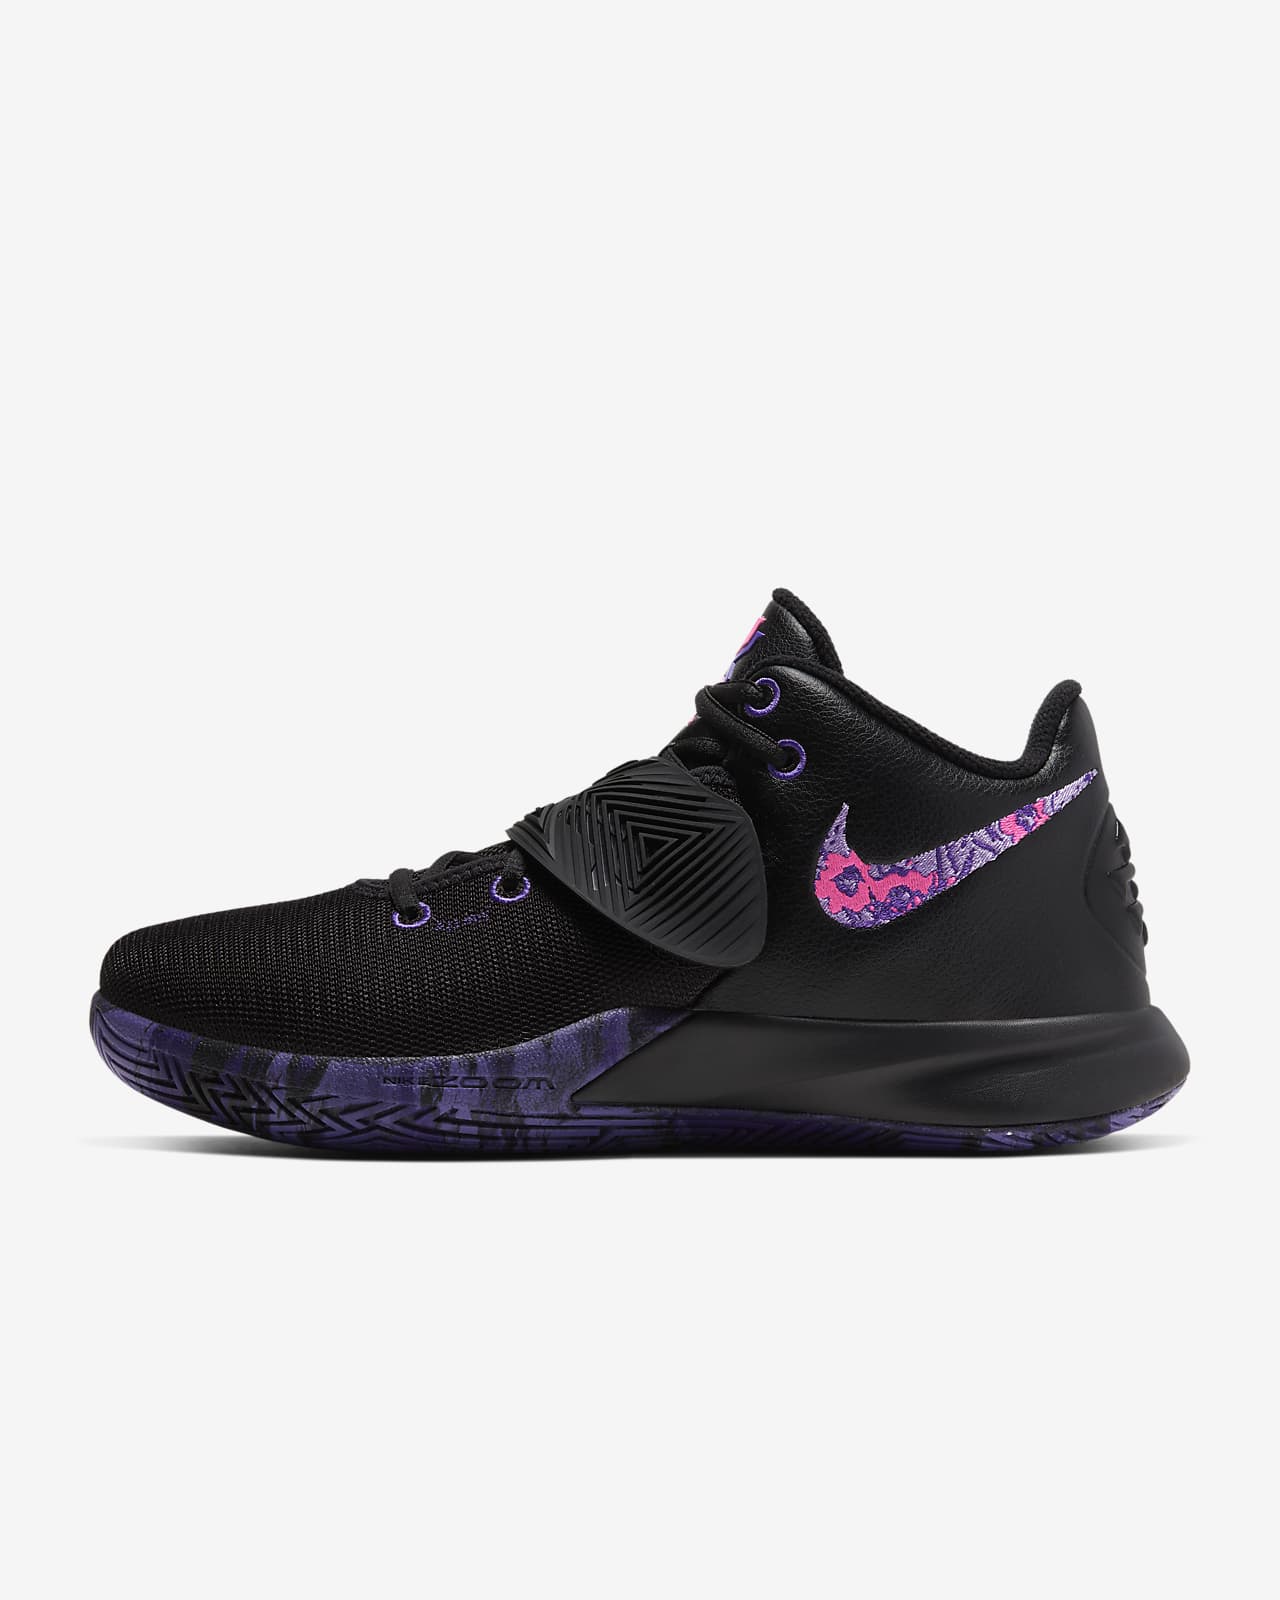 kyrie 2 shoes philippine price